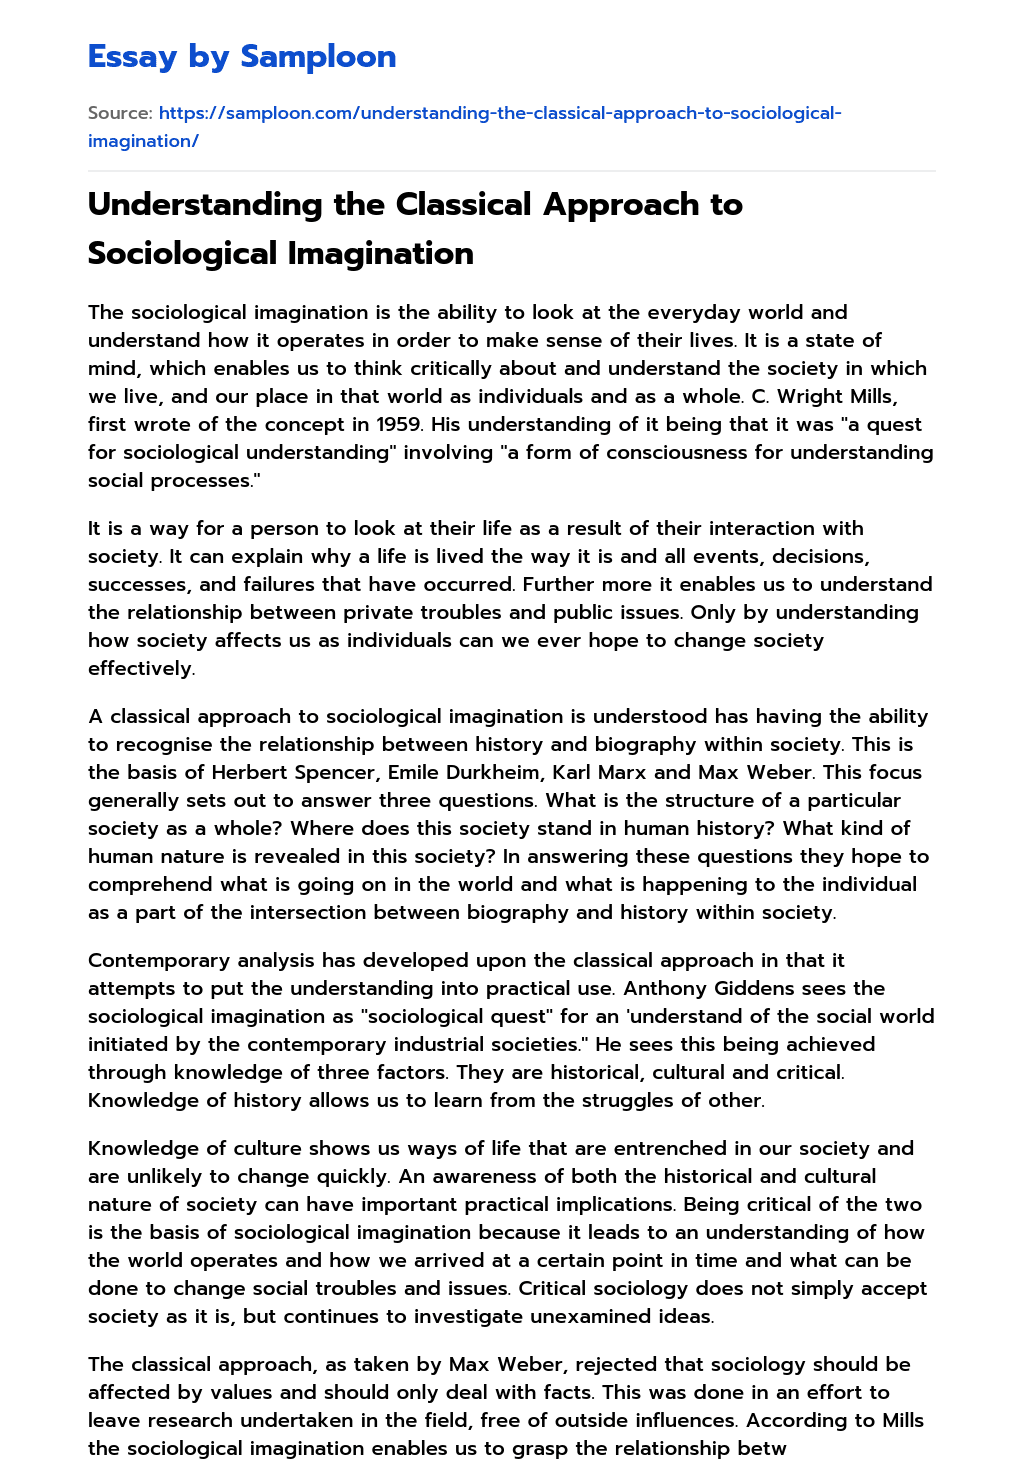 Understanding the Classical Approach to Sociological Imagination essay